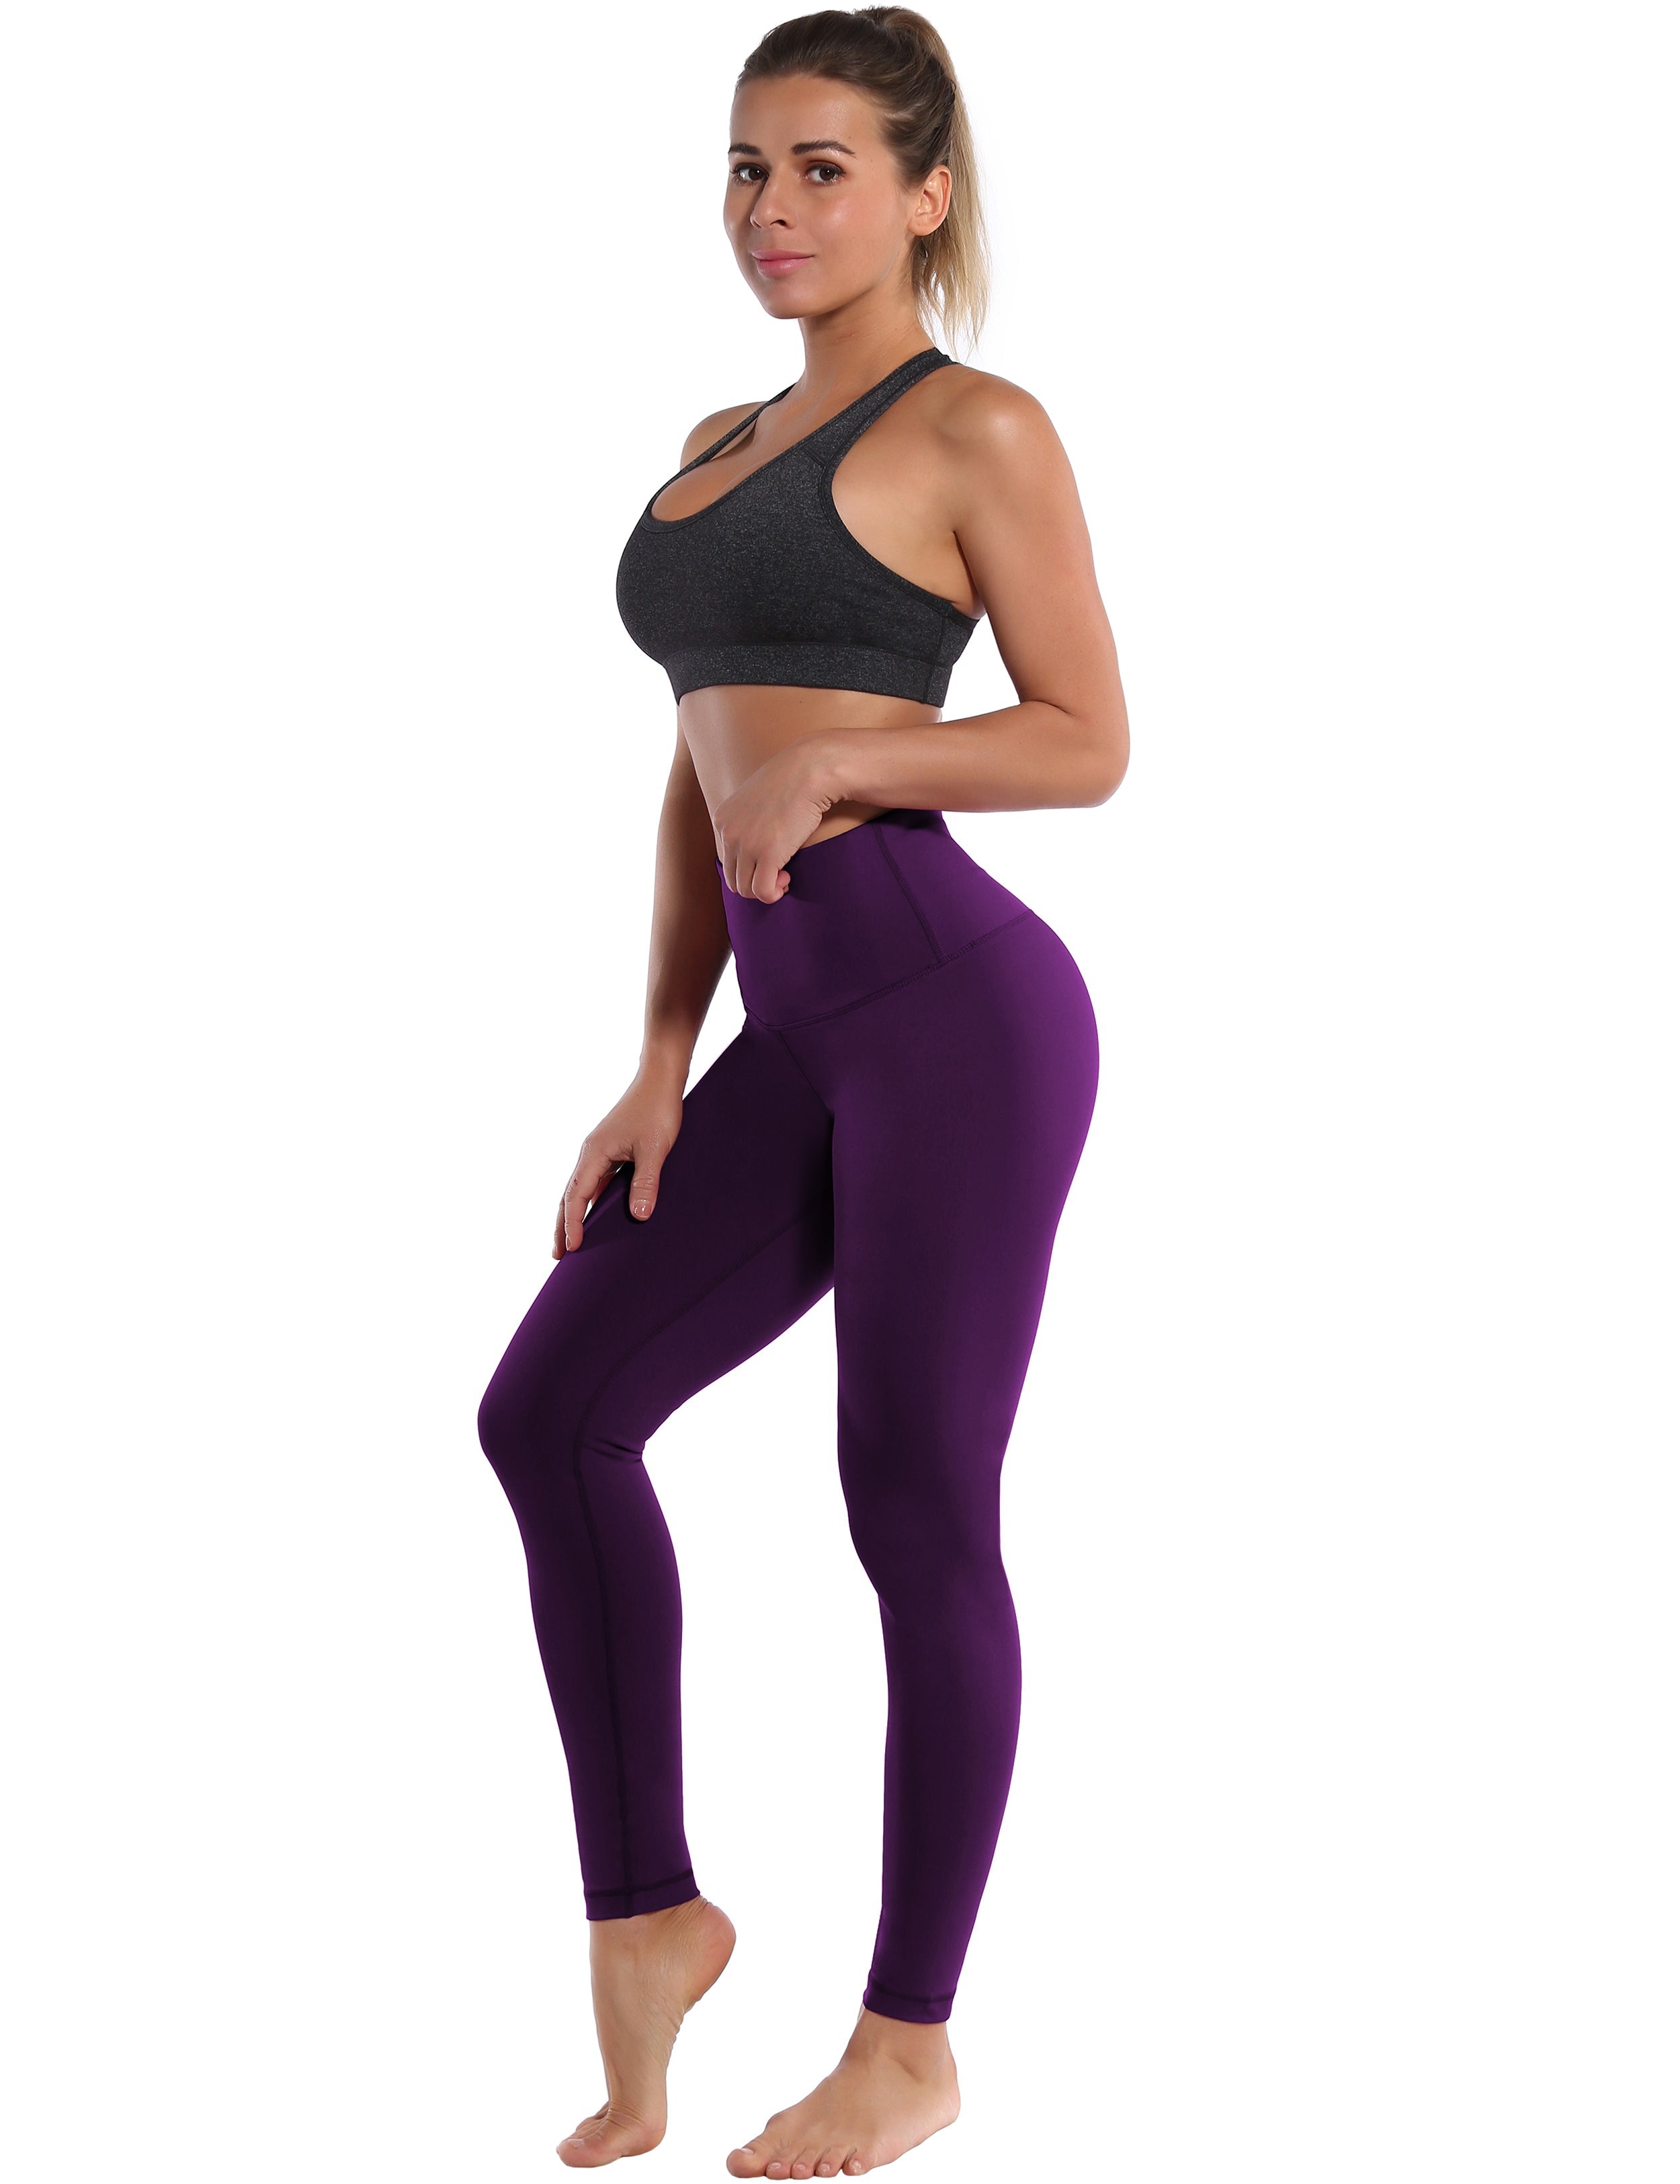 High Waist Golf Pants plum 75%Nylon/25%Spandex Fabric doesn't attract lint easily 4-way stretch No see-through Moisture-wicking Tummy control Inner pocket Four lengths